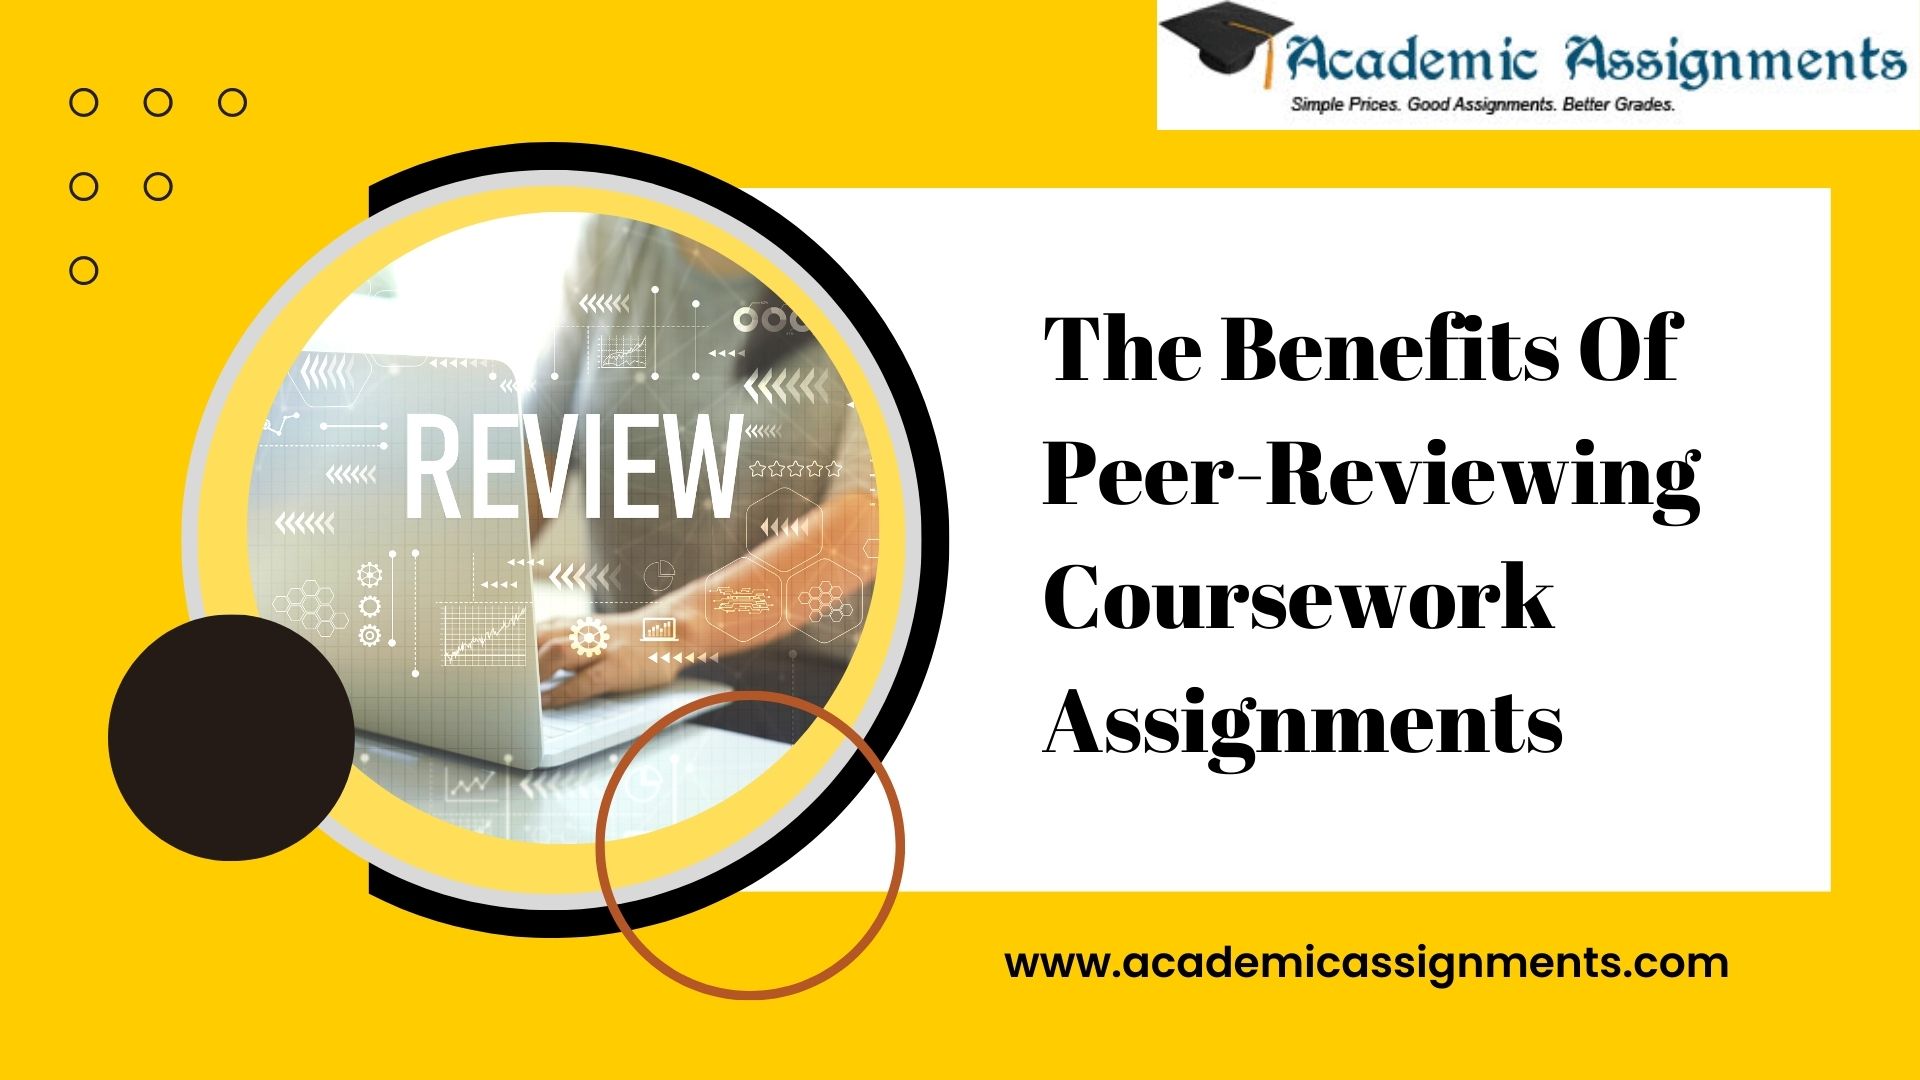 The Benefits Of Peer-Reviewing Coursework Assignments